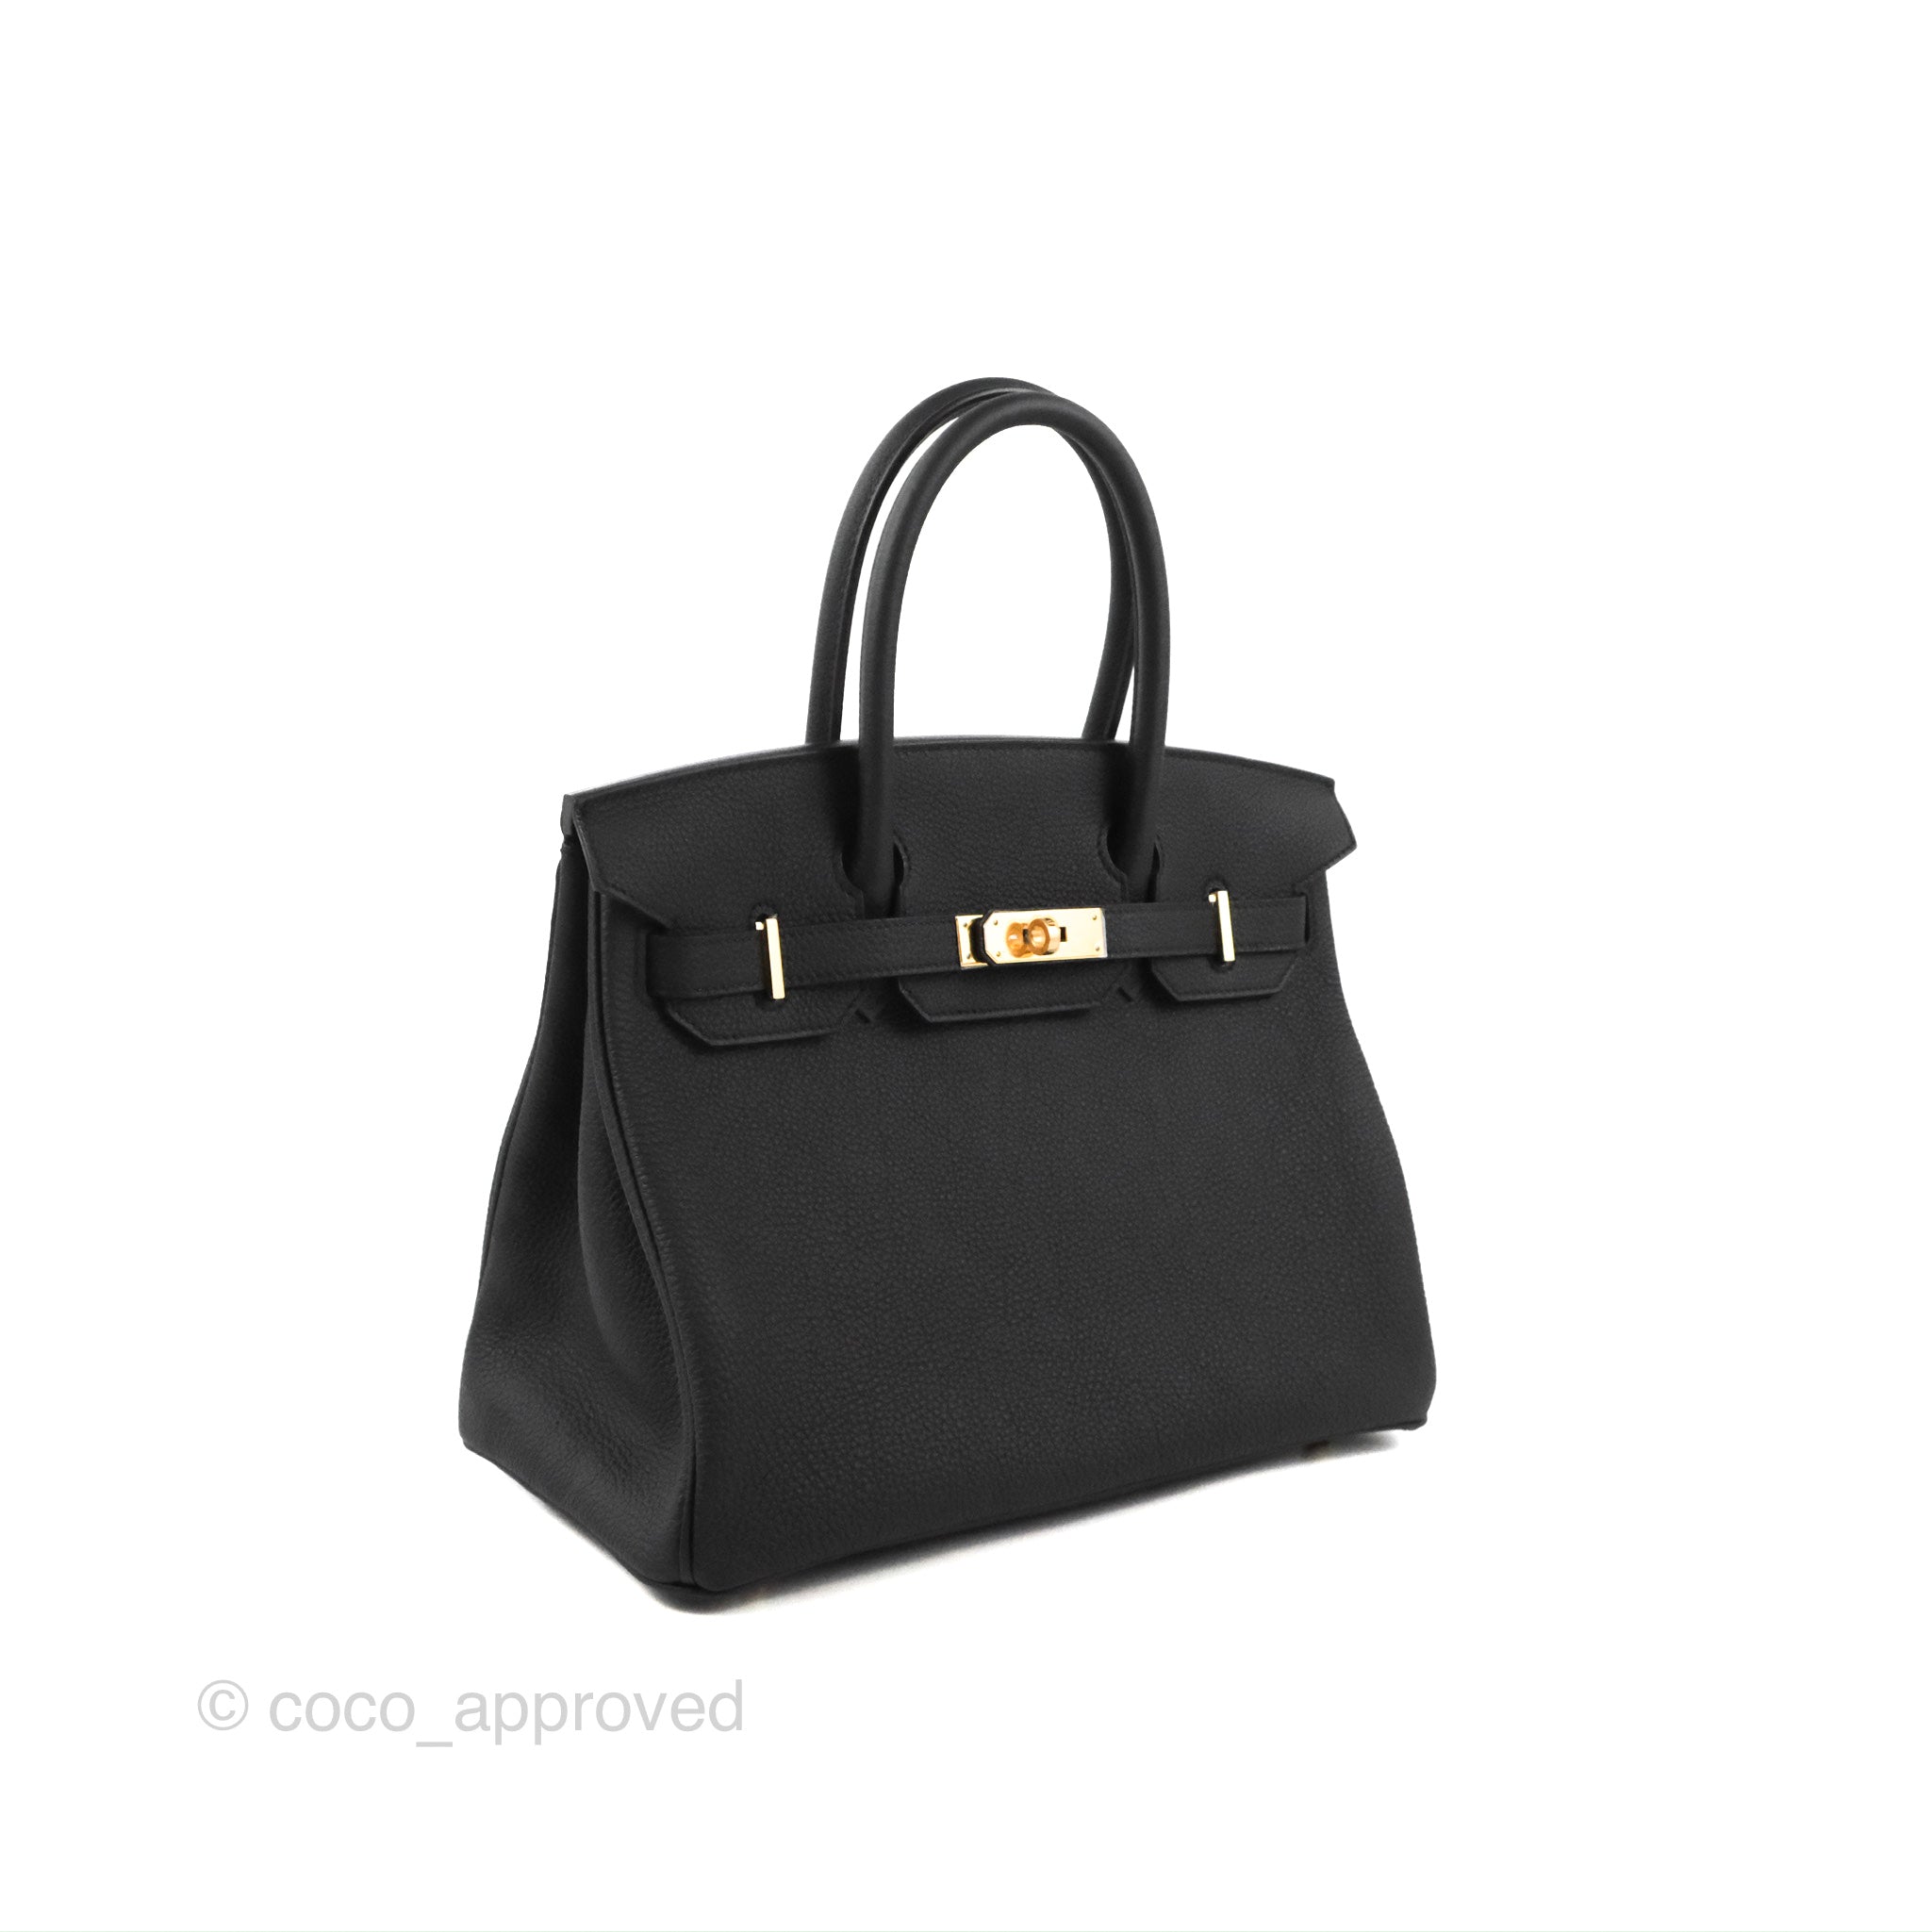 Hermes Birkin 30 Black Togo With Gold Hardware 2014 – RELUXE1ST